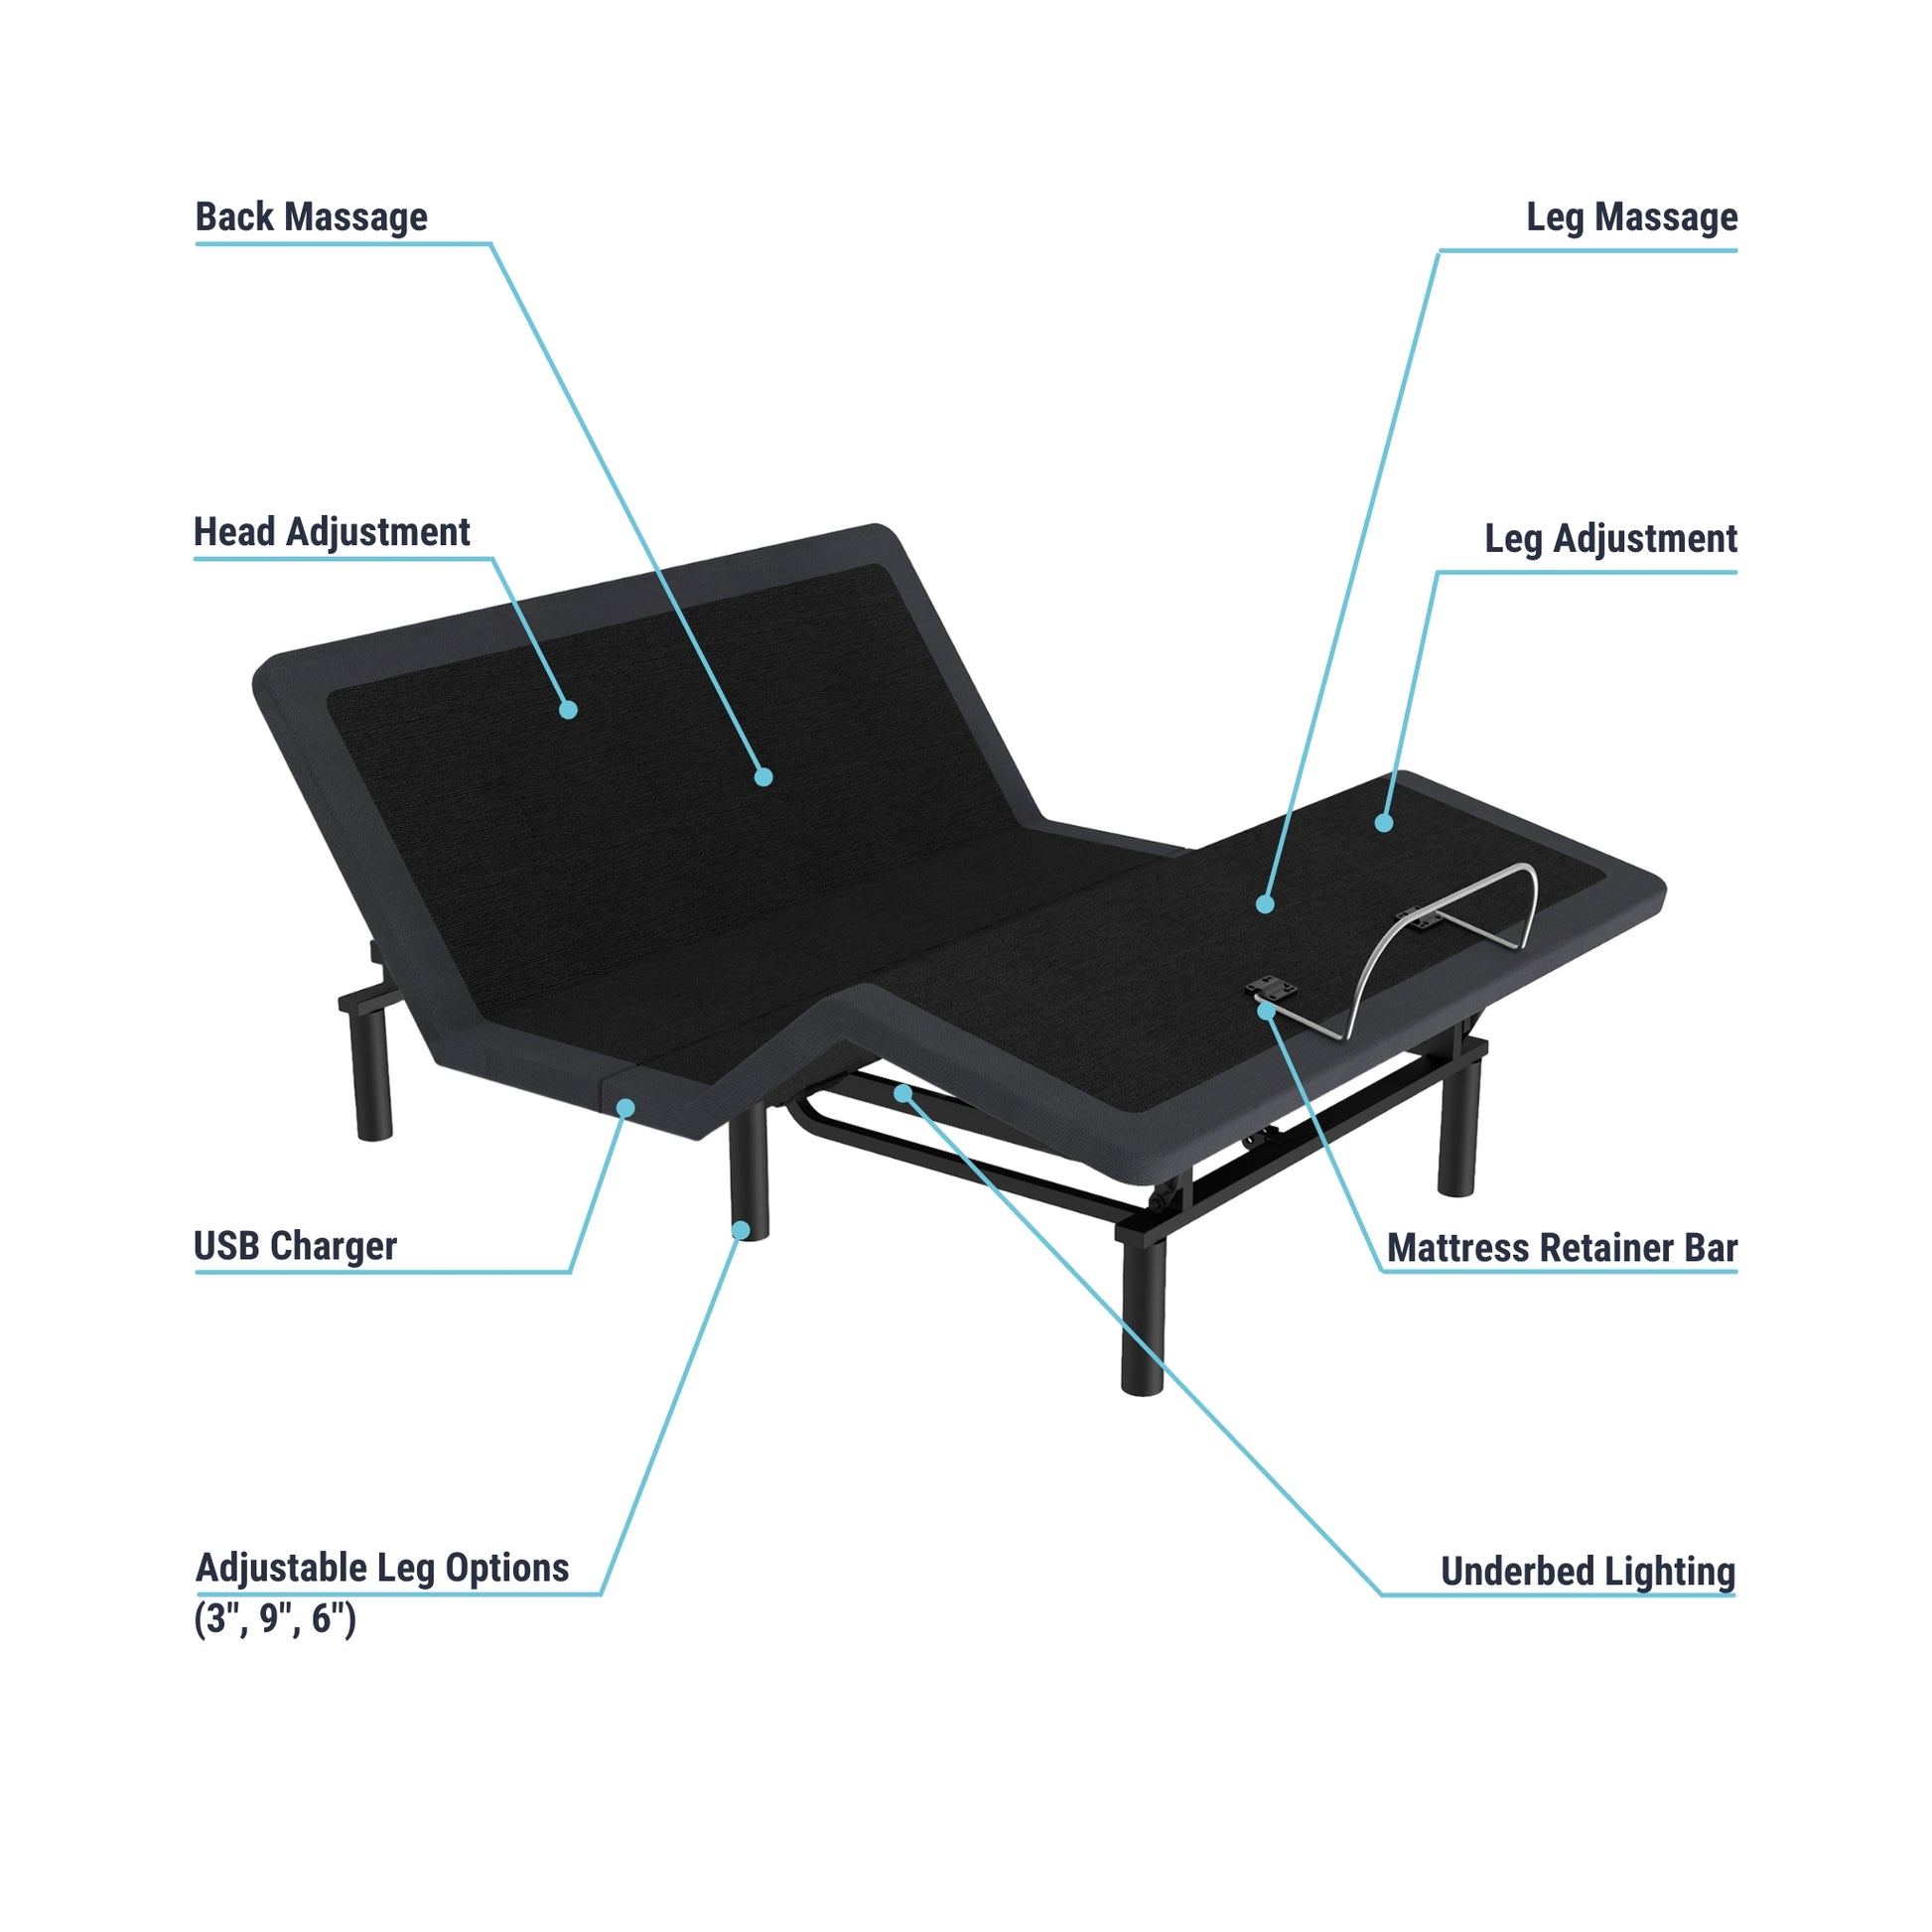 Drift Pro – Adjustable Bed Frame features